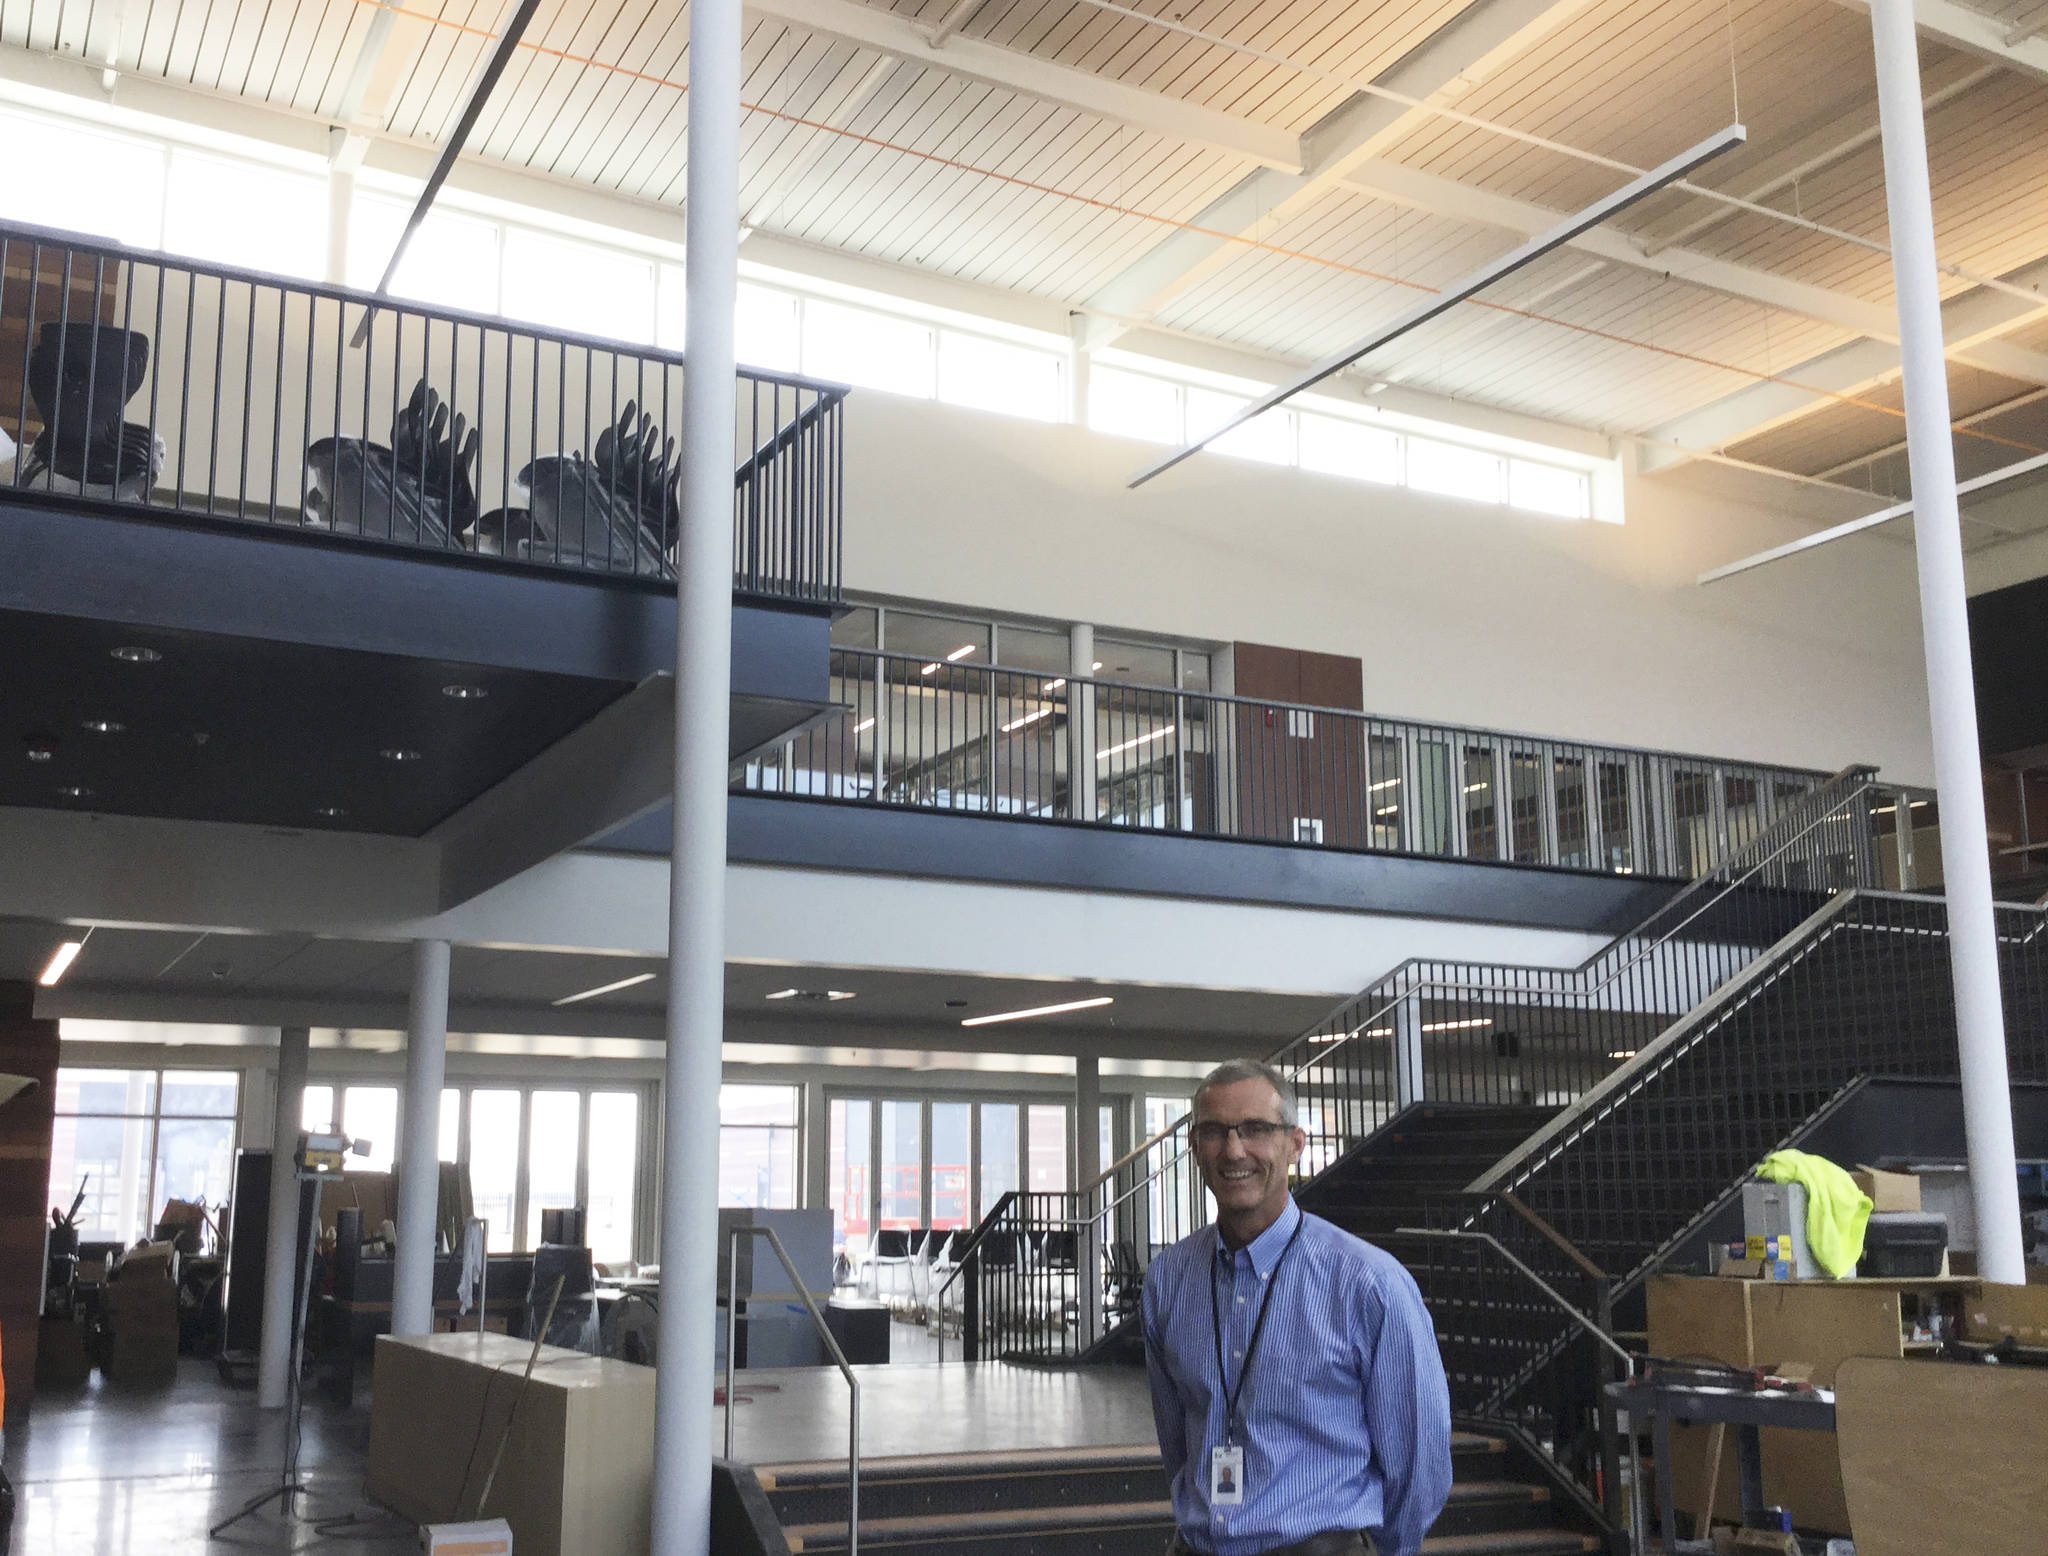 Schools Superintendent Michael Mack stands in the central commons area at the new Lakewood High School as teachers prepare their classrooms for the first day of school on Wednesday, June 6. Behind Mack on the second floor is the “college, career and beyond” wing, linked closely with the library.